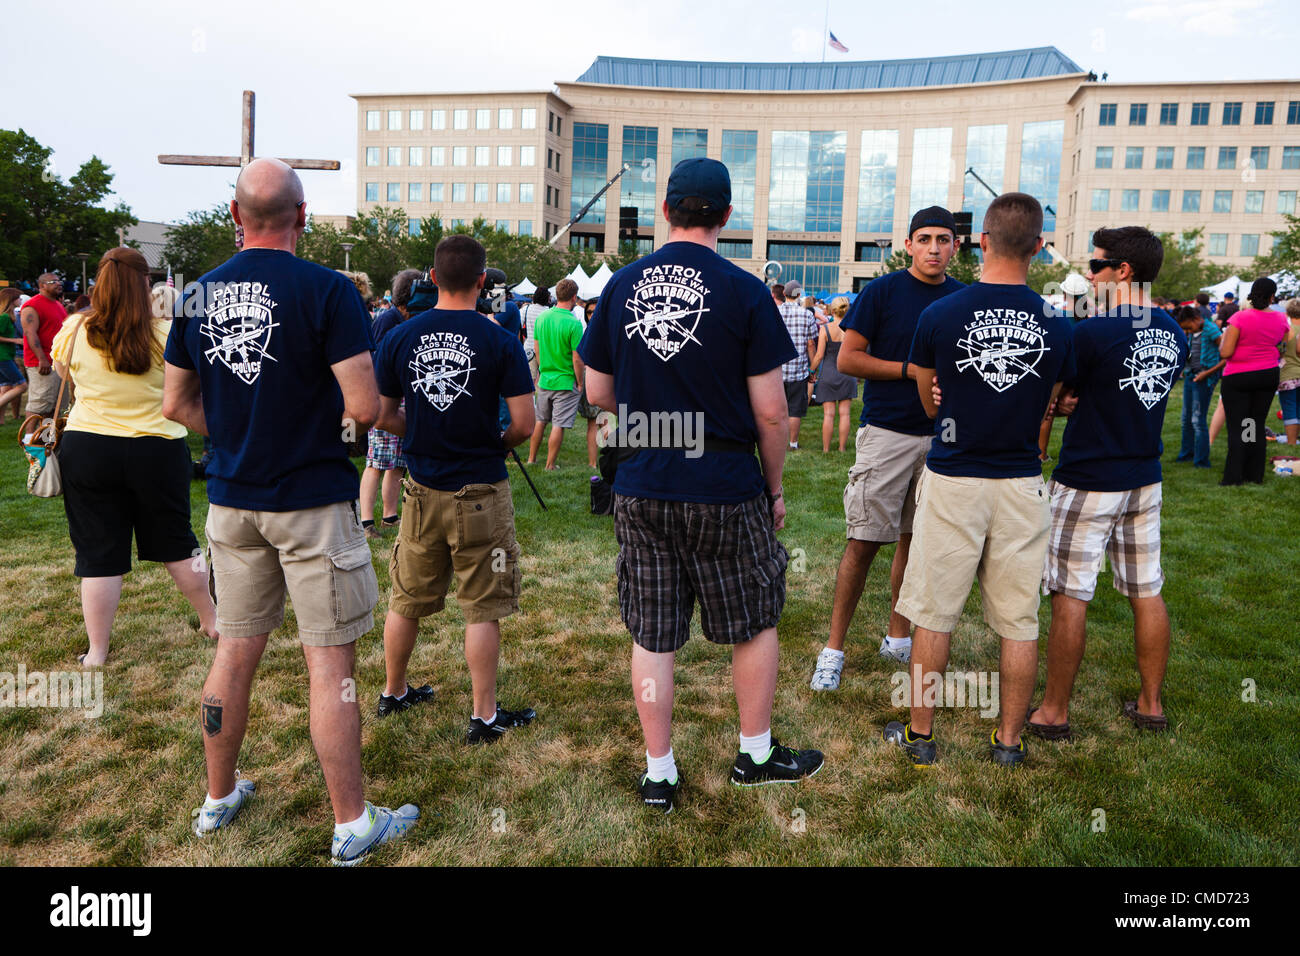 Aurora, CO – Police officers from Dearborn, Michigan were present during a prayer vigil at the Aurora Municipal Building on July 22, 2012. The police officers were in Colorado Springs at an Explorer competition and decided to stay to attend the vigil to express their support for the community. USA. Stock Photo